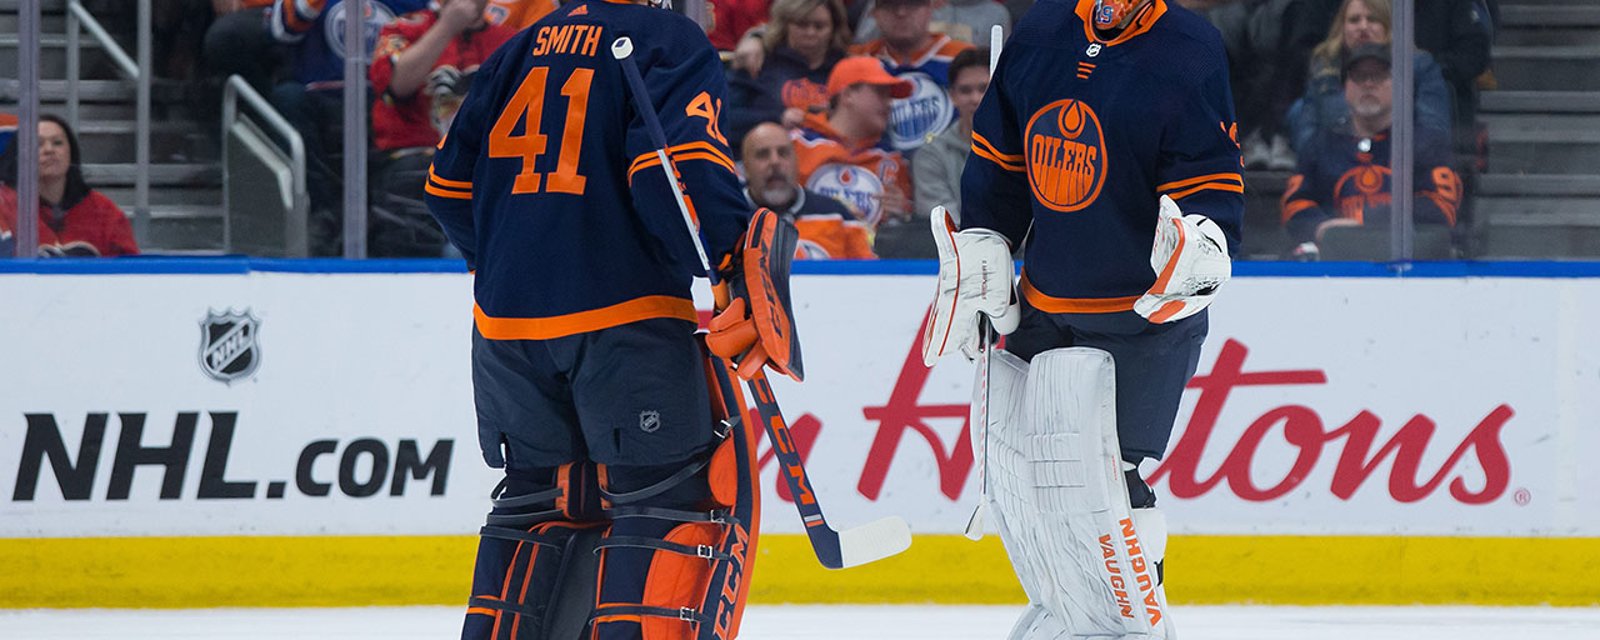 Move coming to Edmonton as goalie Smith is placed on long-term injury reserve! 